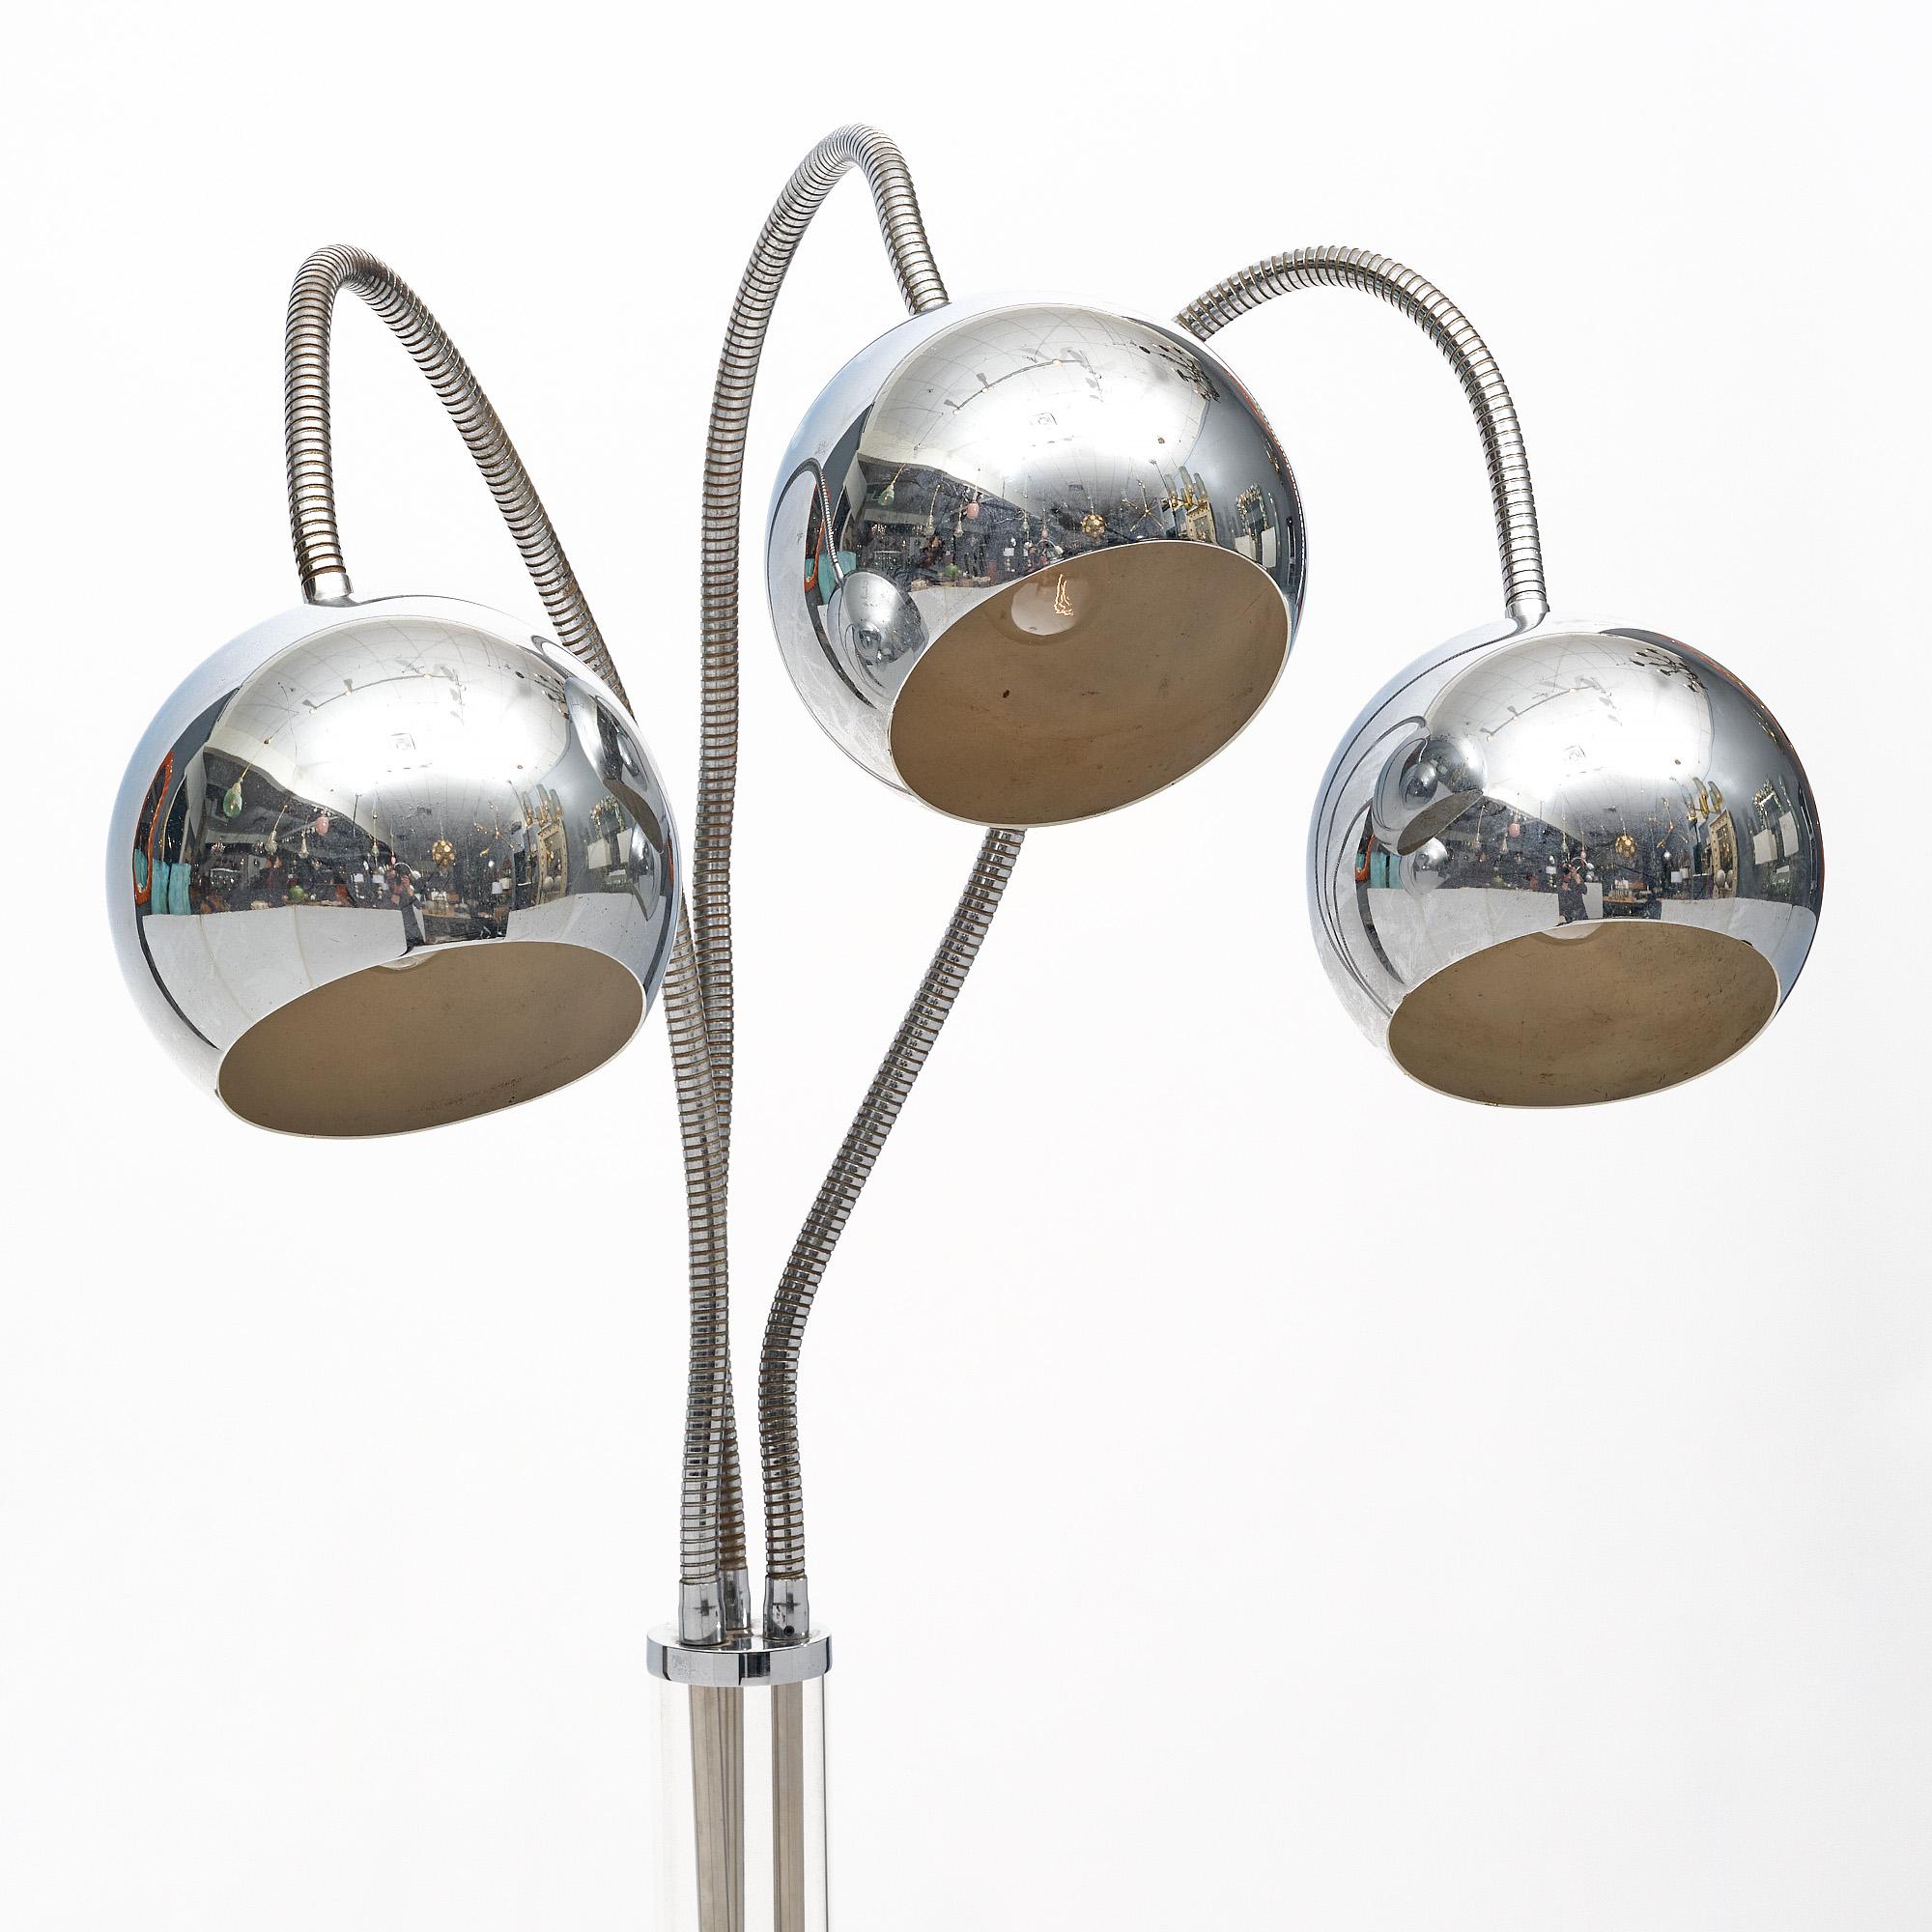 Floor lamp from mid-century Italy with three chromed adjustable arms. Each arm features the original shade. The body of the lamp is Lucite. It has been newly wired to fit US standards. The height listed of 79